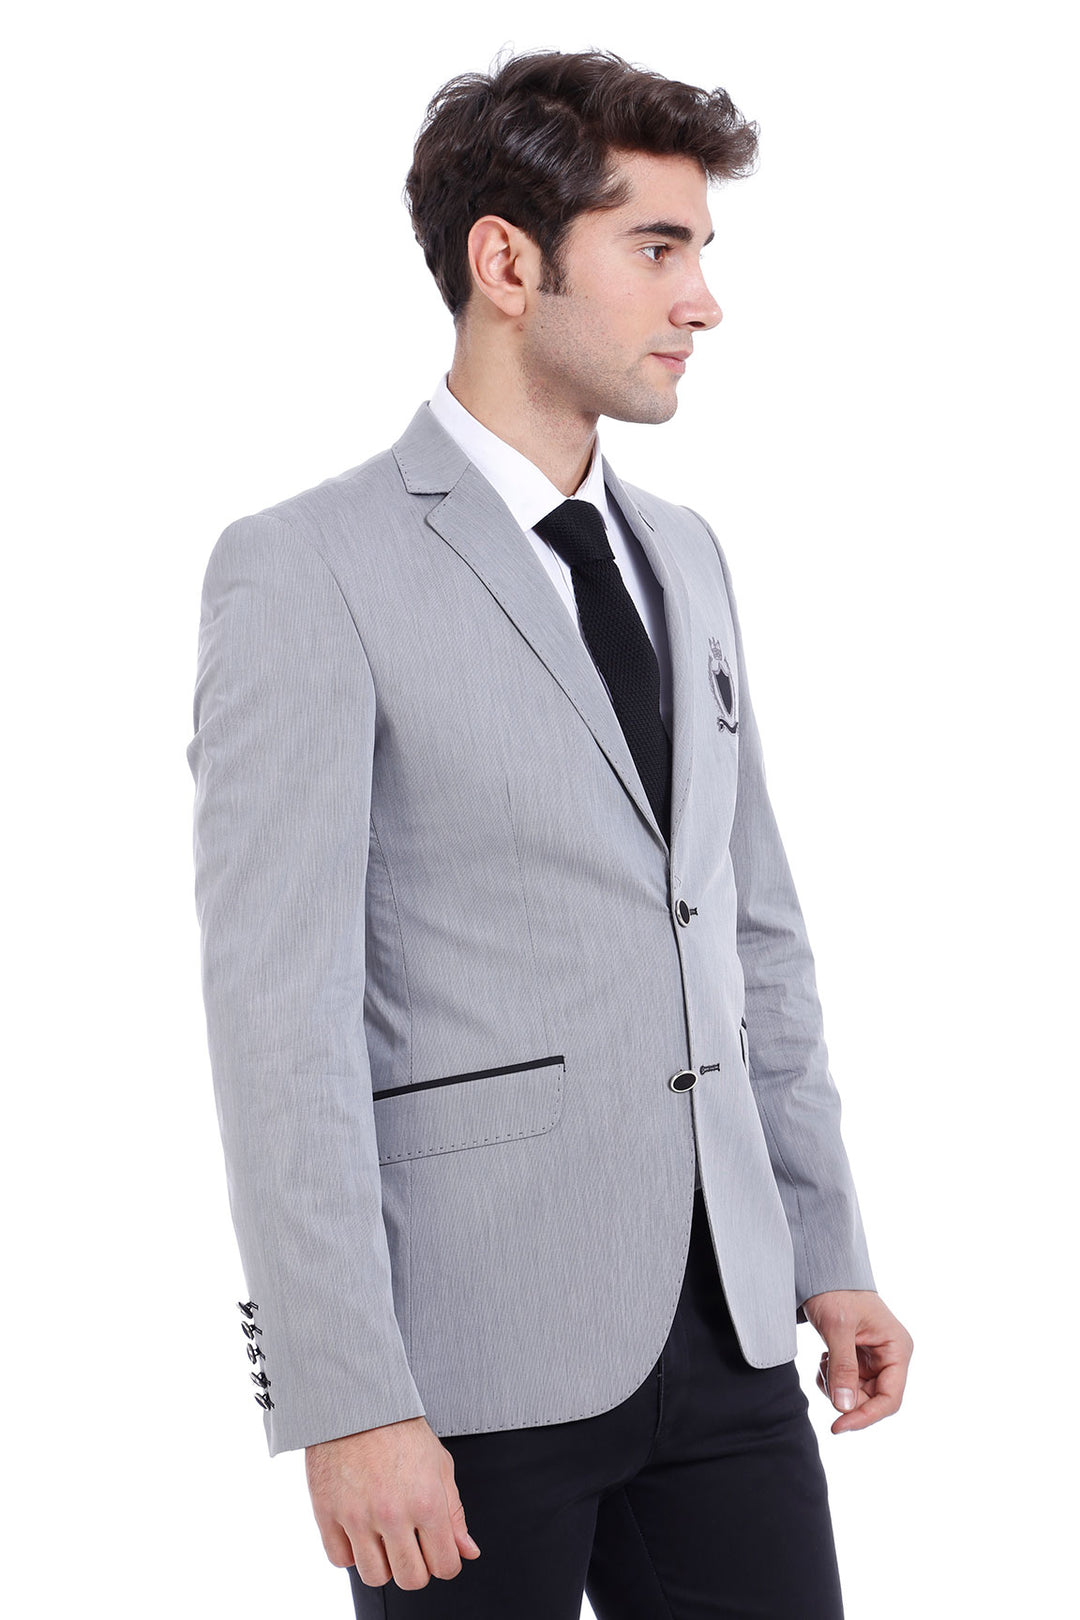 Double Button Mono Lapel Crested Grey Jacket-Wessi